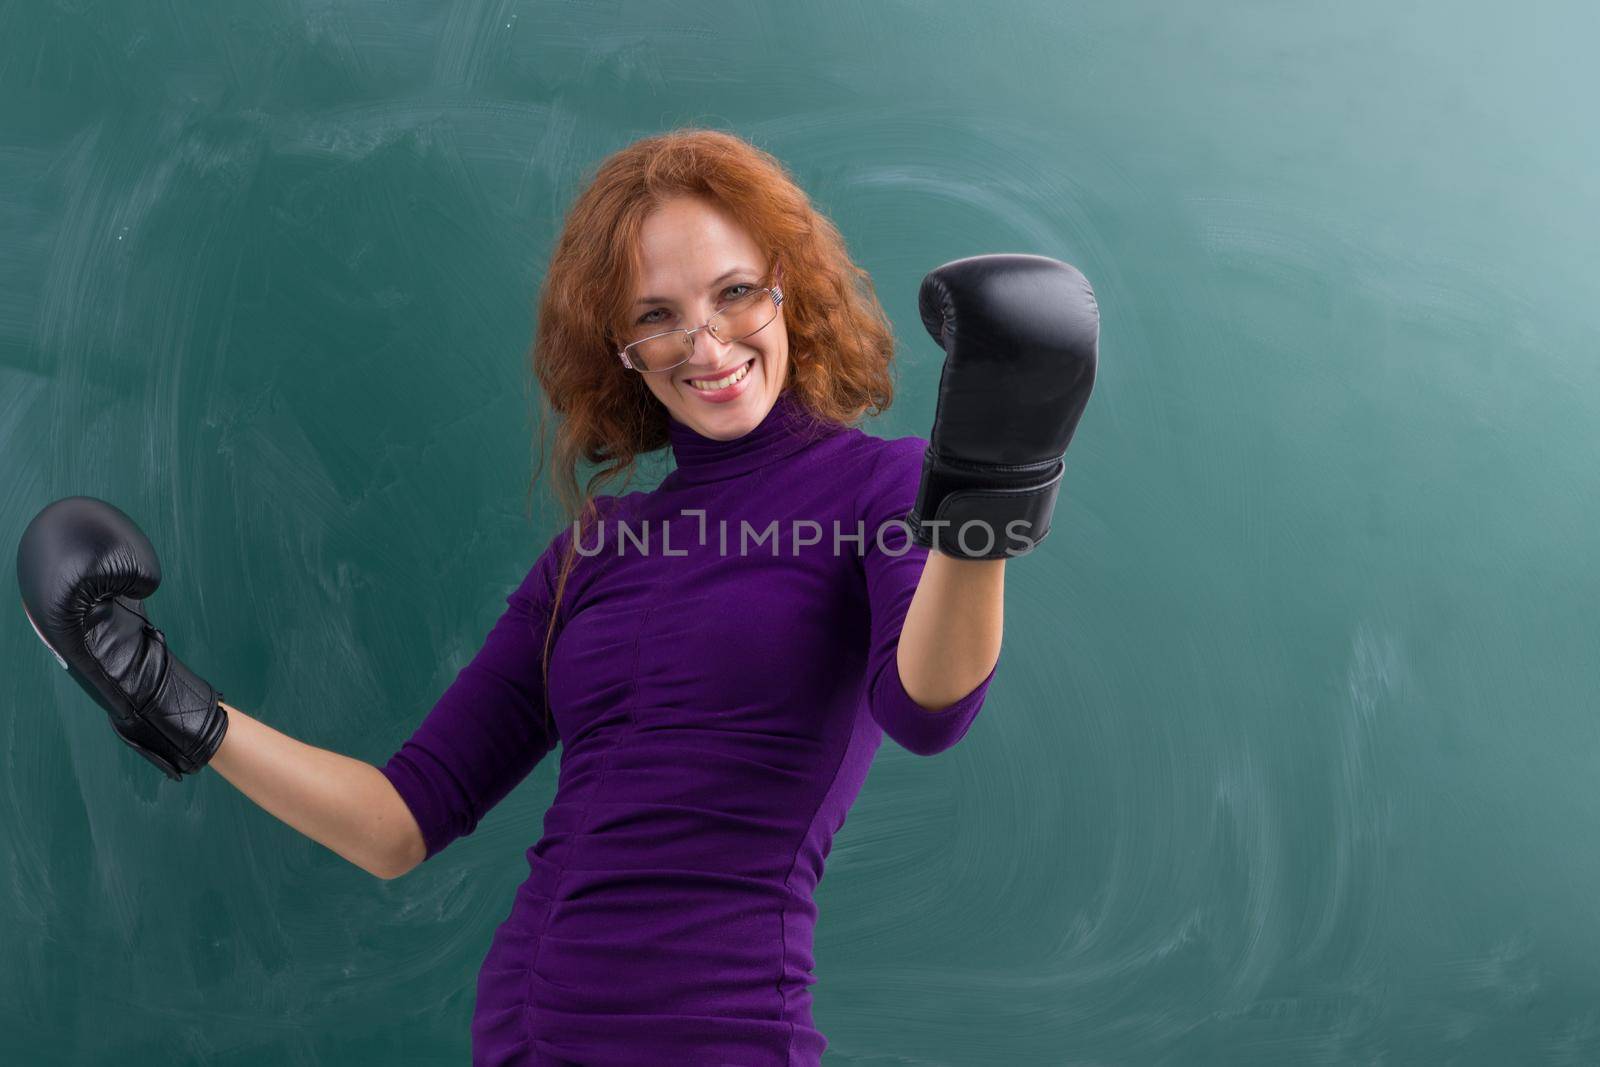 Smiling teacher wearing black boxing gloves celebrating her winning in front of blank green chalkboard. Young woman wearing glasses and purple casual dress standing in winning pose with arms raised